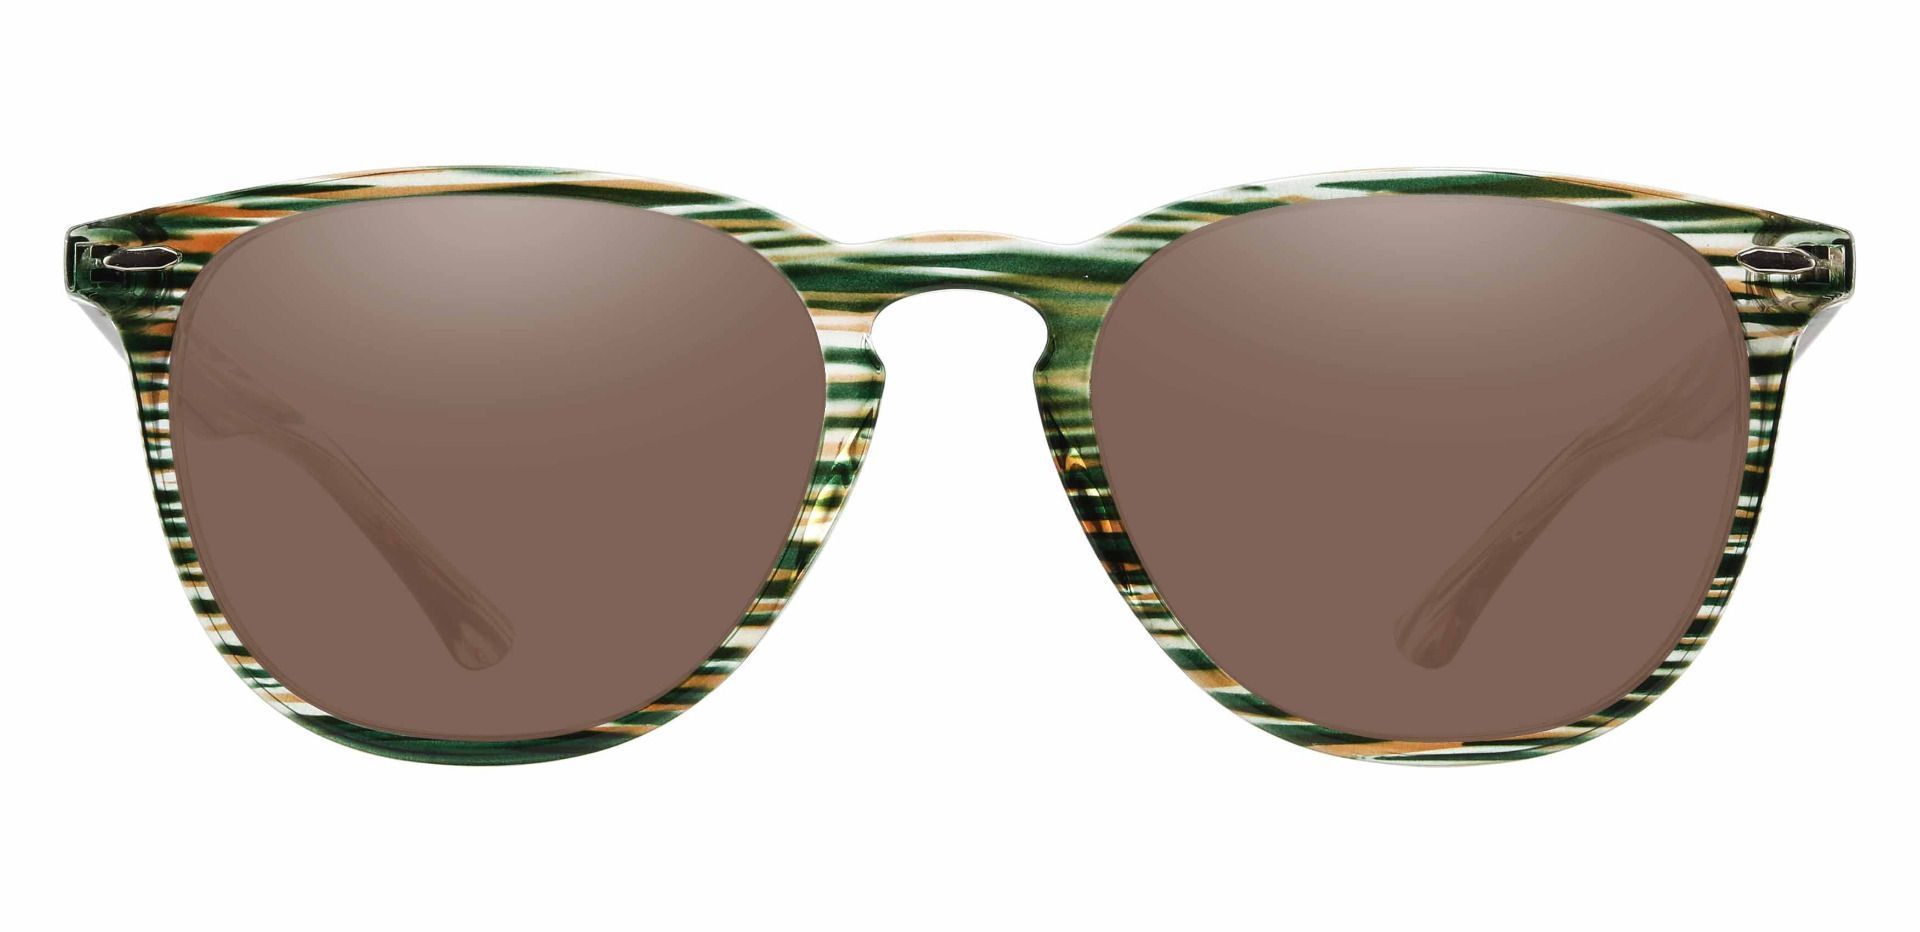 Sycamore Oval Reading Sunglasses - Green Frame With Brown Lenses